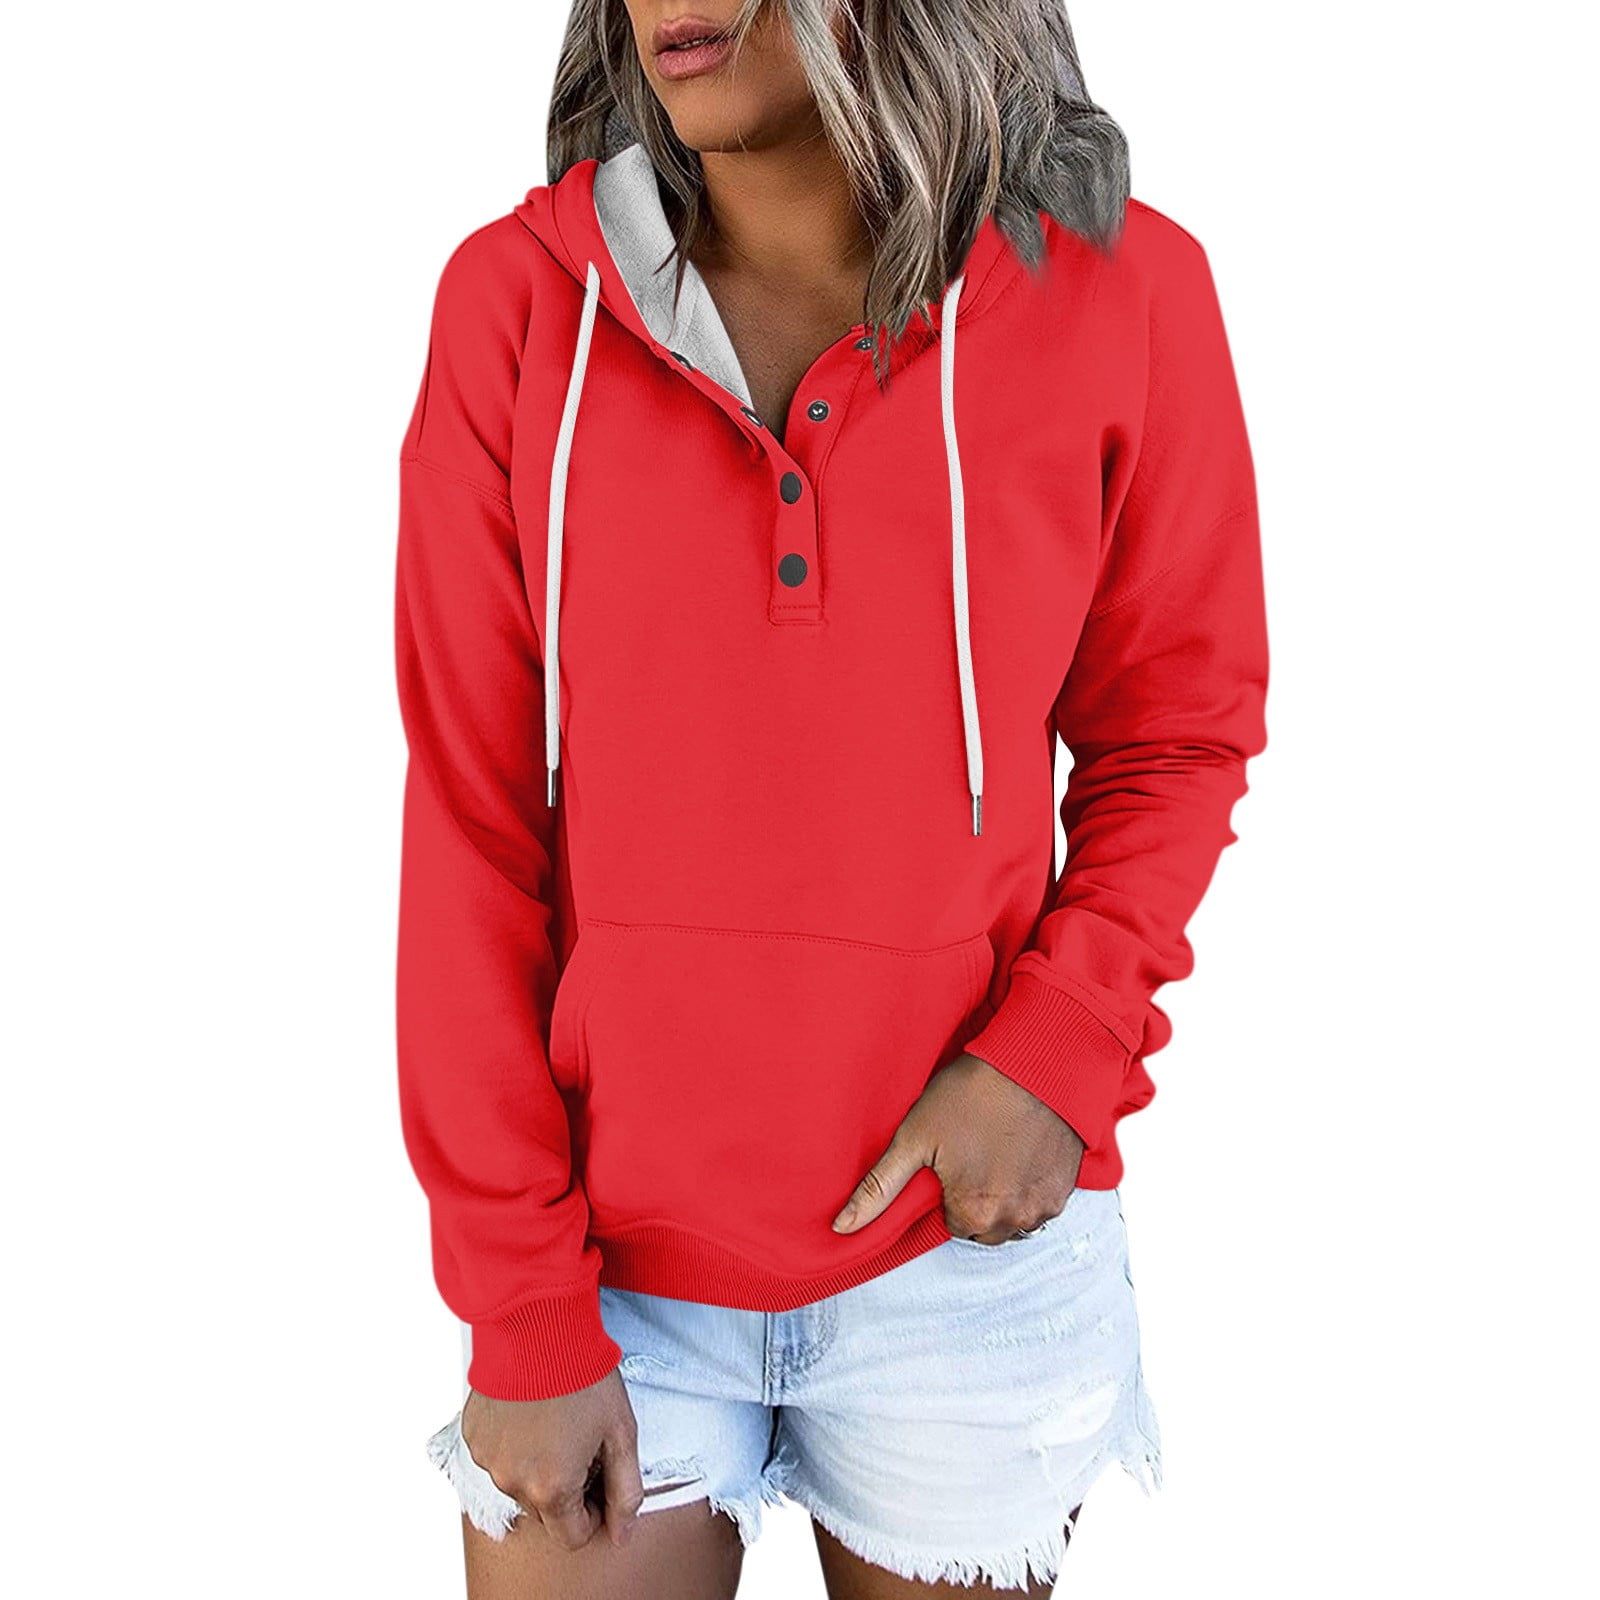 Umitay Essential Hoodie Women's Casual Fashion Solid Color Long Sleeve  Pullover Hoodies Sweatshirts 